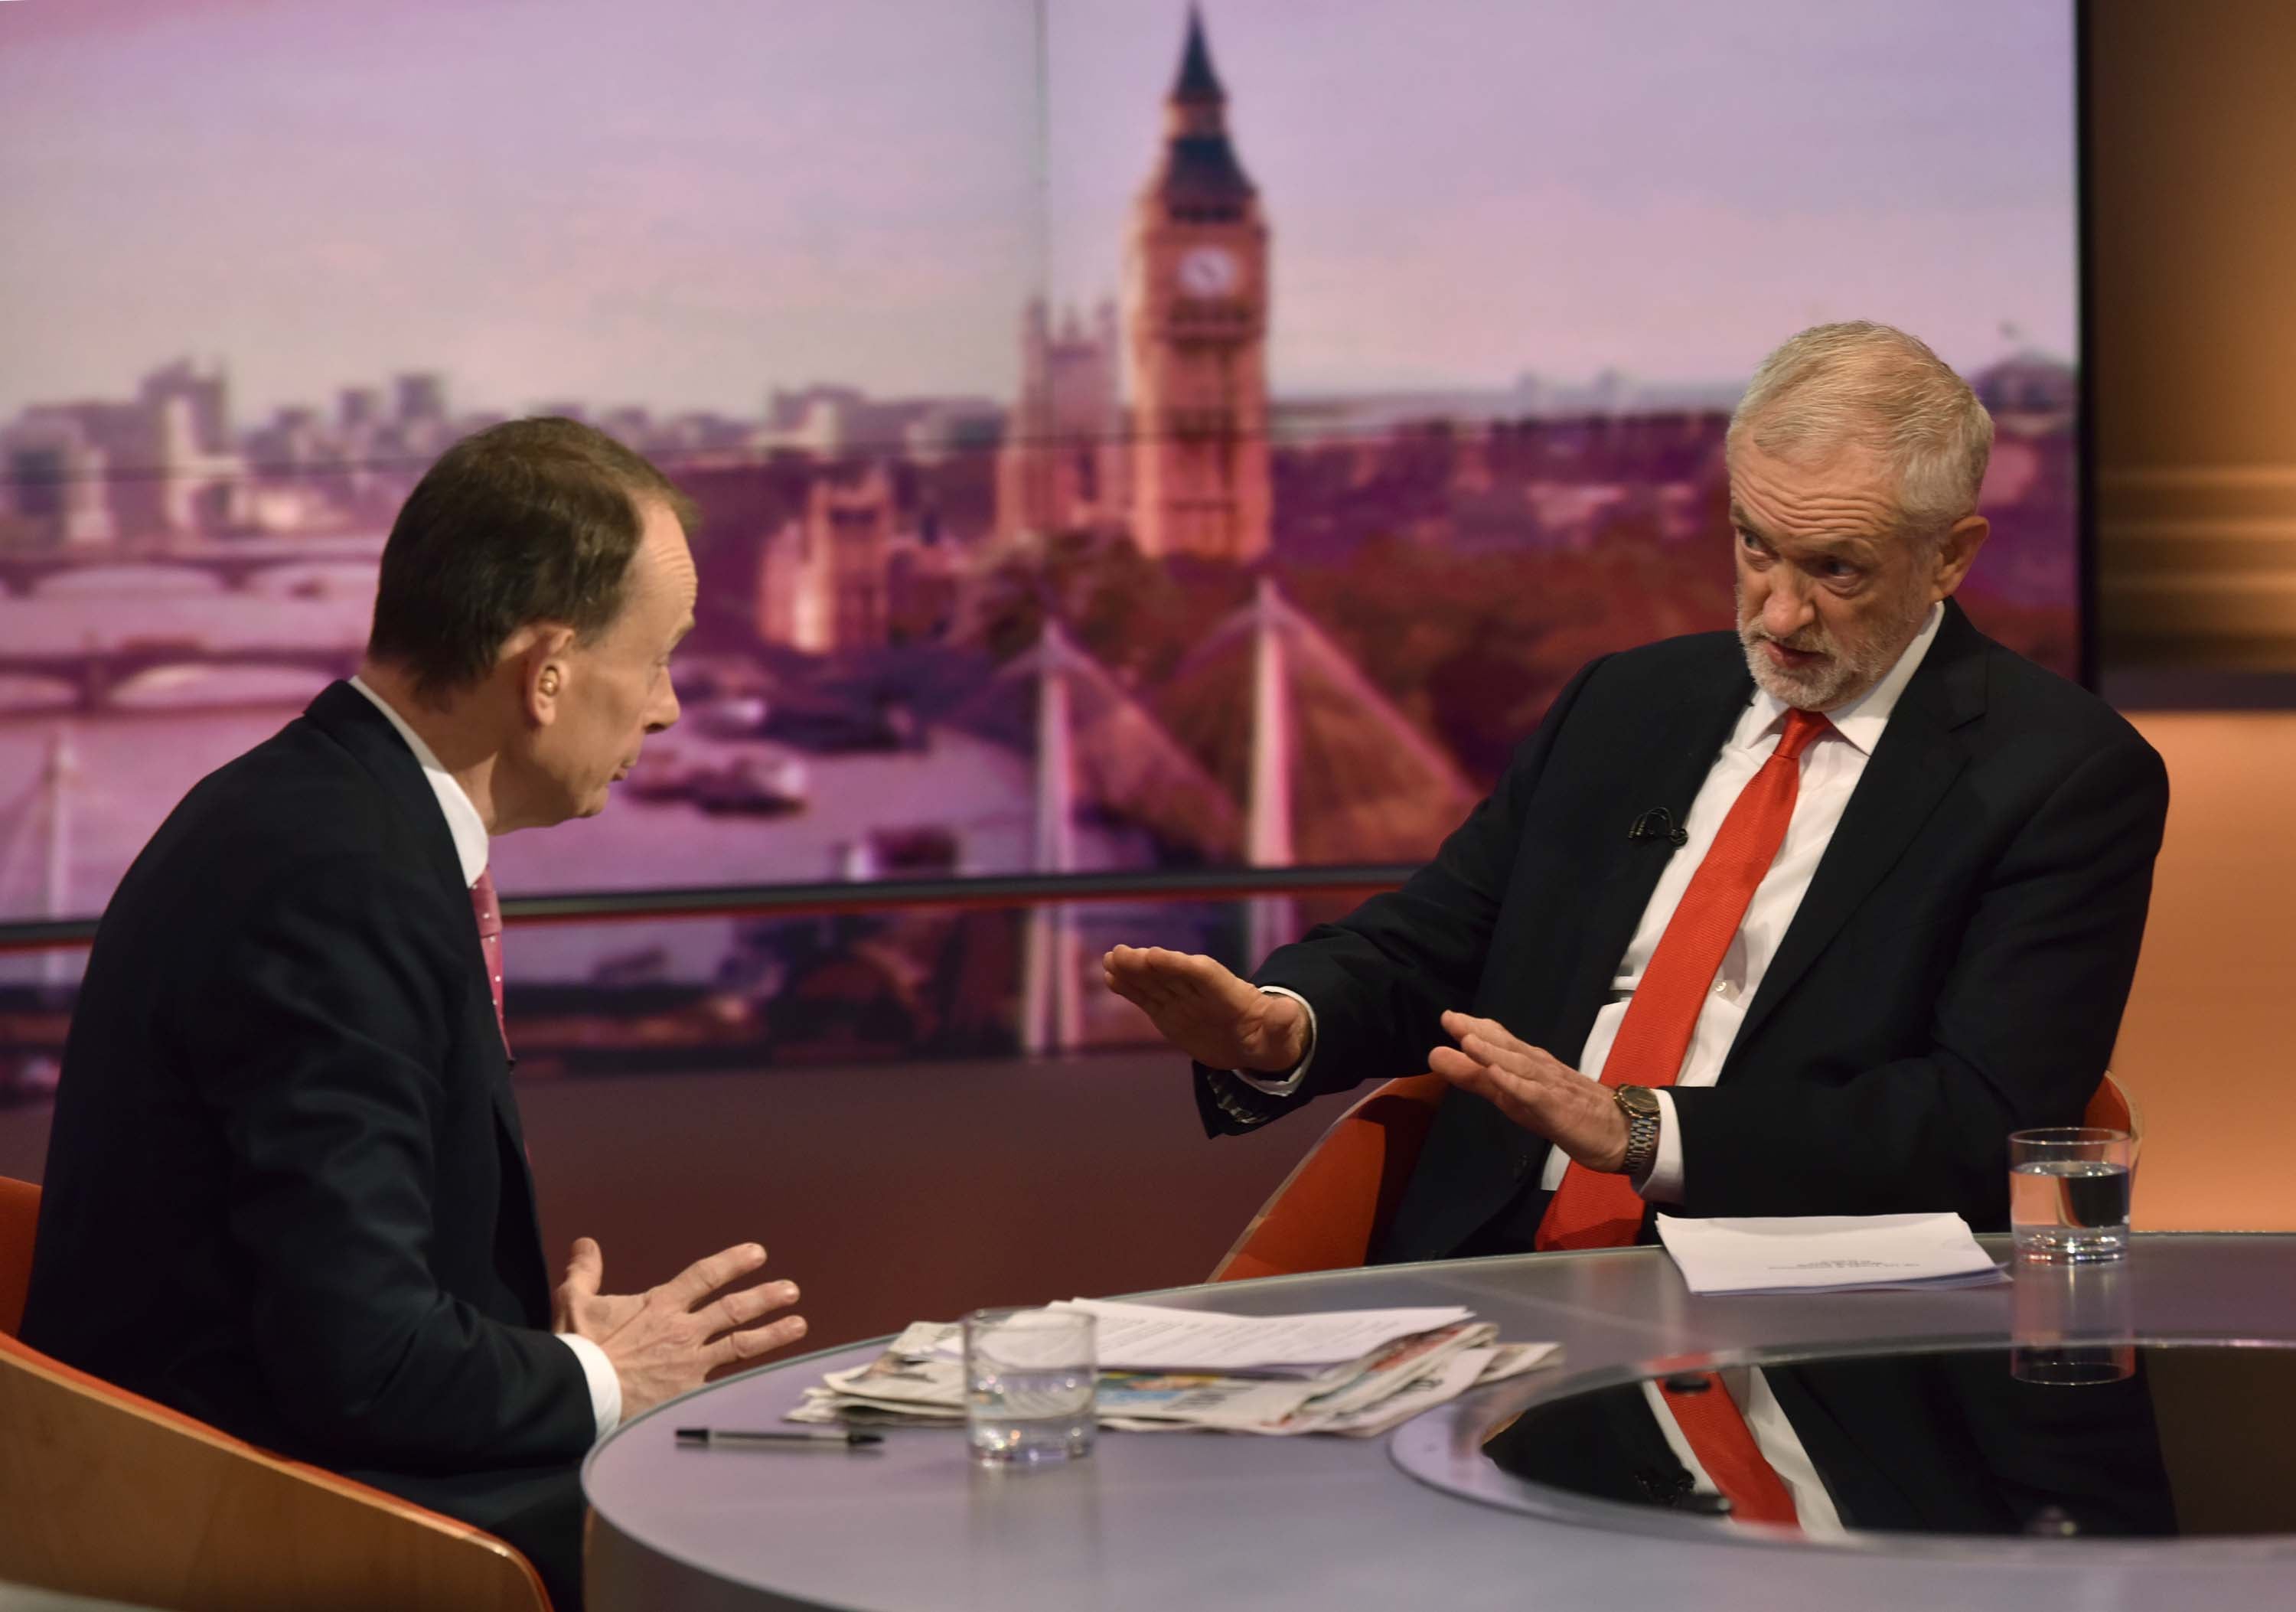 Jeremy Corbyn, right, being interviewed by host Andrew Marr on the BBC1 current affairs programme, The Andrew Marr Show (Jeff Overs/BBC/PA)